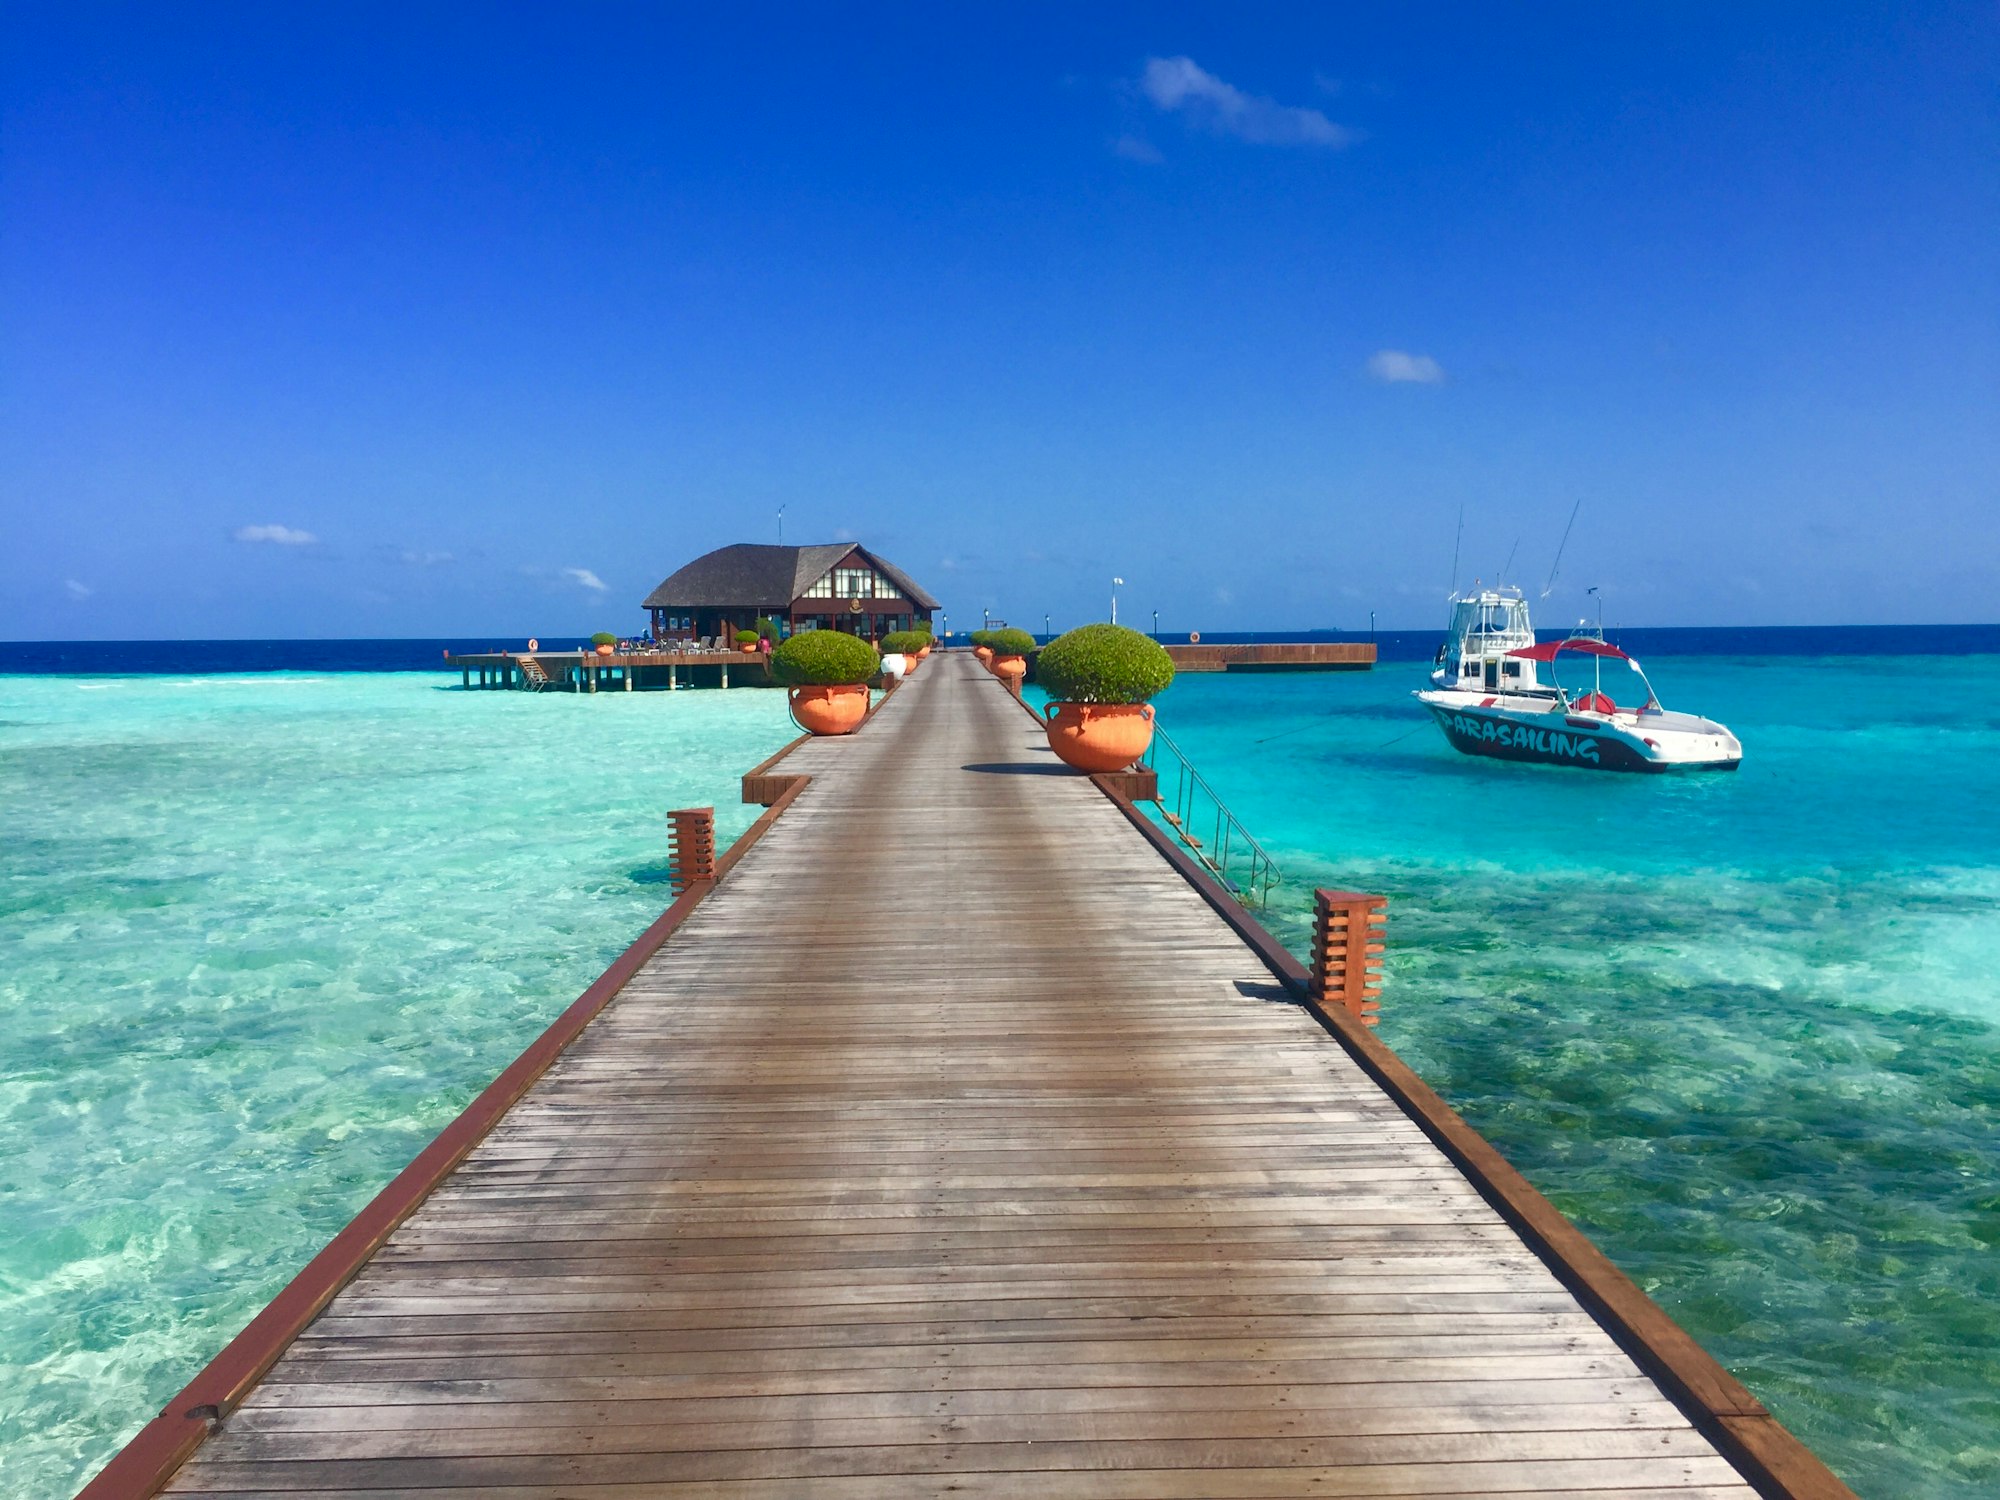 Visa-free entry to the Maldives for Indians